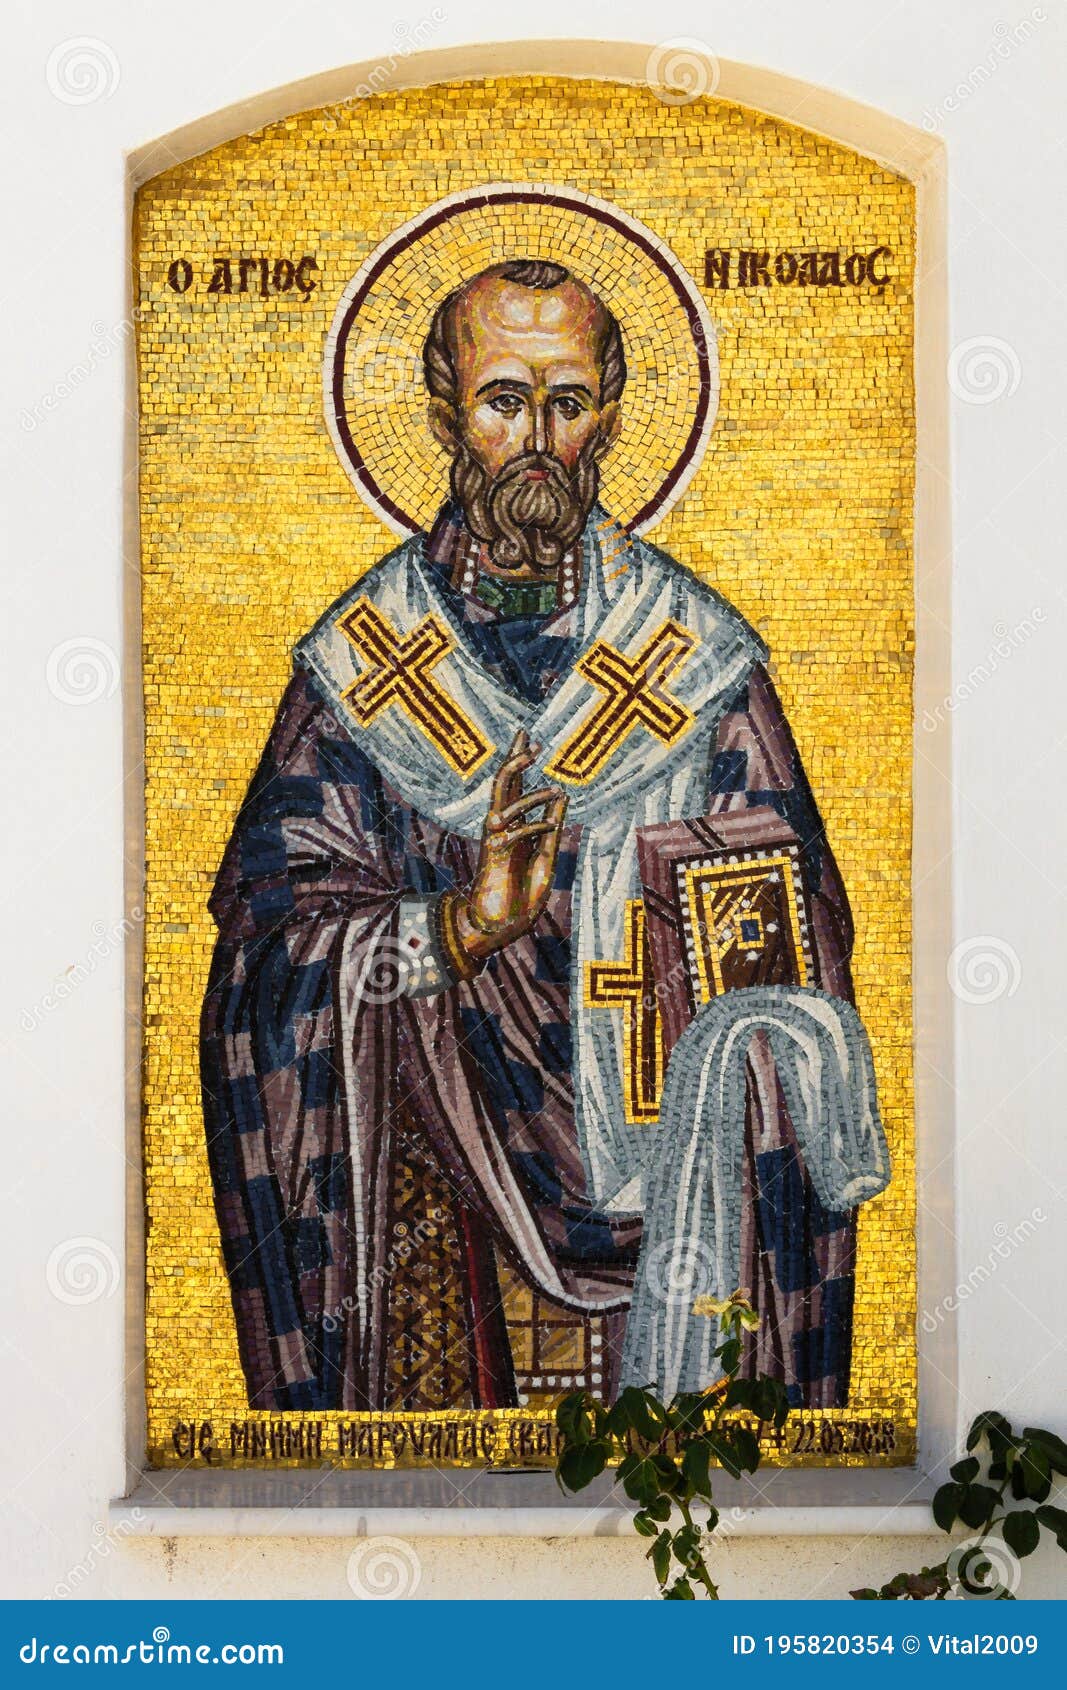 mosaic in the form of an icon on the wall of the church of st. nicholas at kalamis beach, in protaras, cyprus